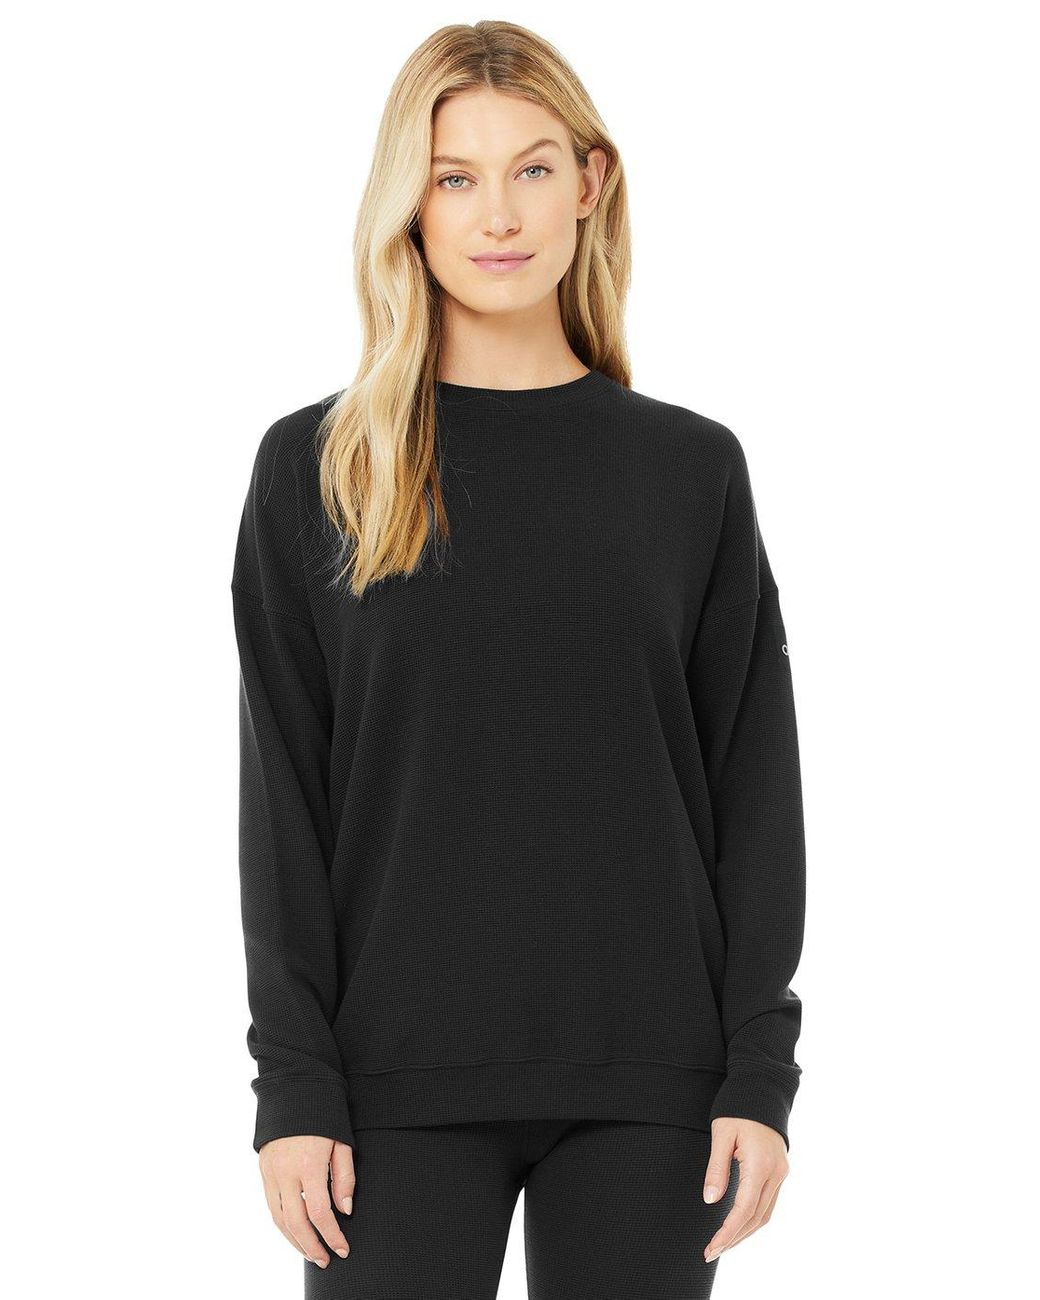 Alo Yoga Micro Waffle Relaxation Pullover Top in Black - Lyst